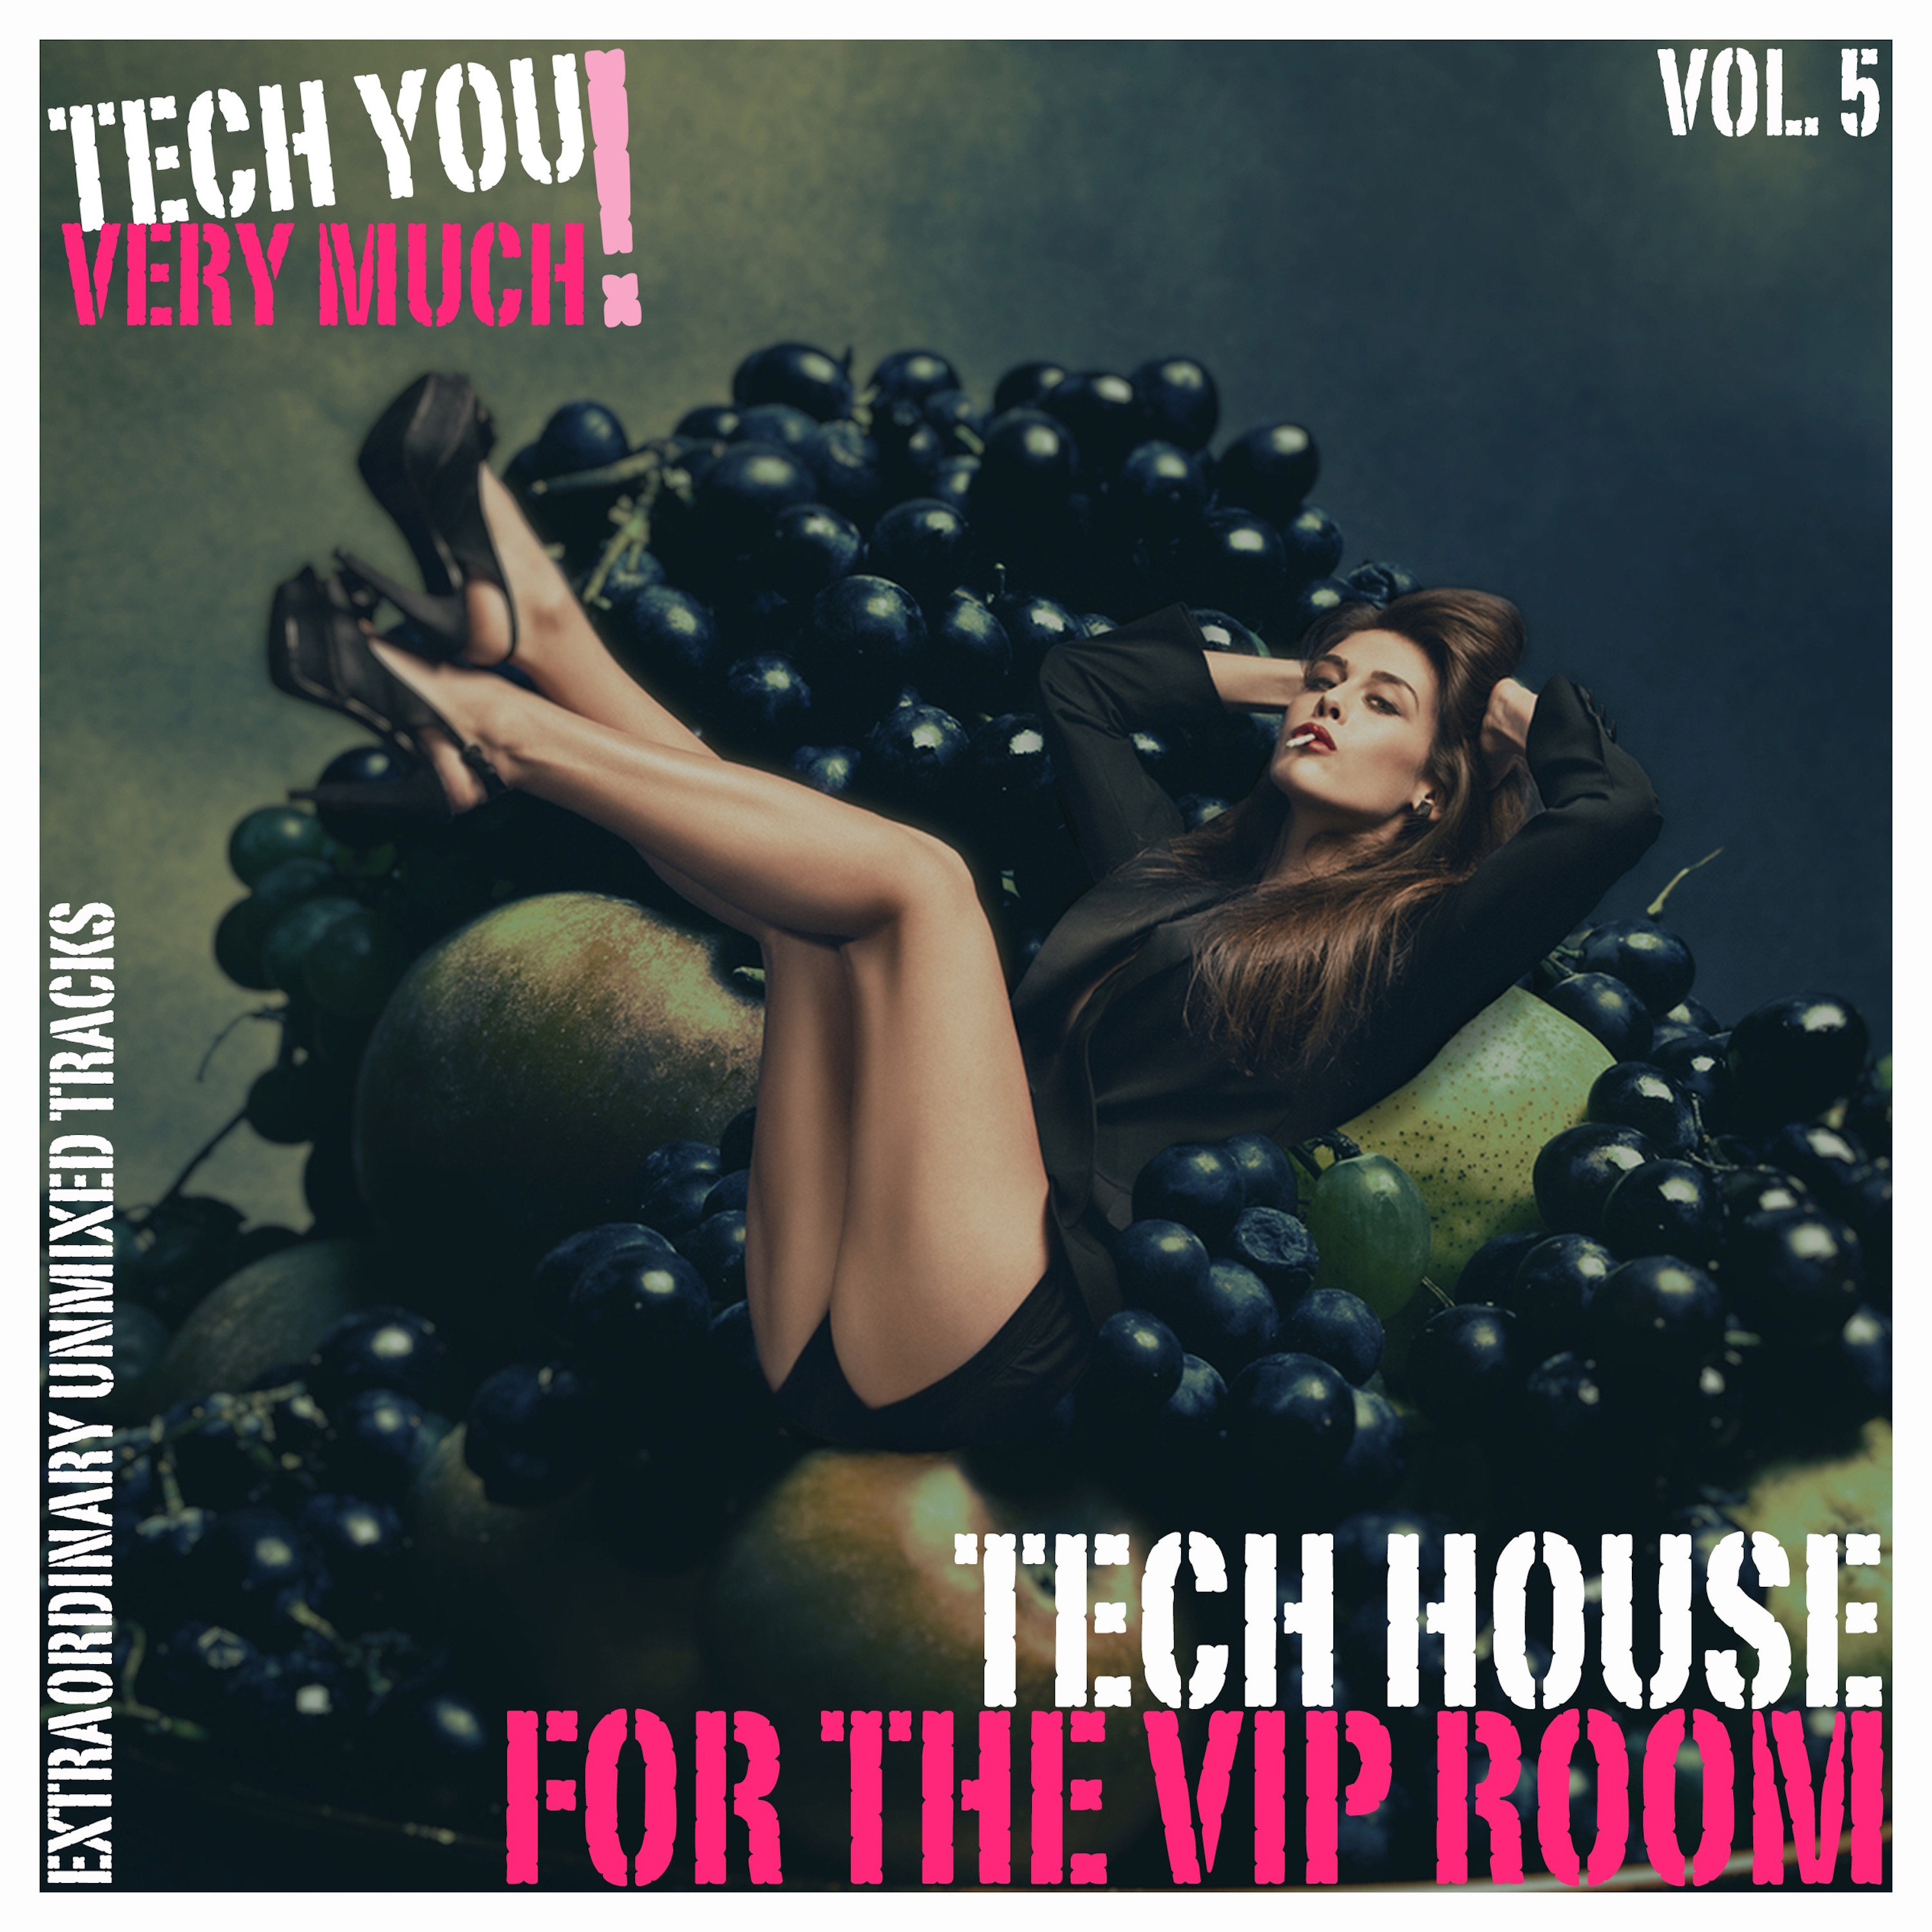 Tech House for the VIP Room, Vol. 5 (Extraordinary Unmixed Tracks)